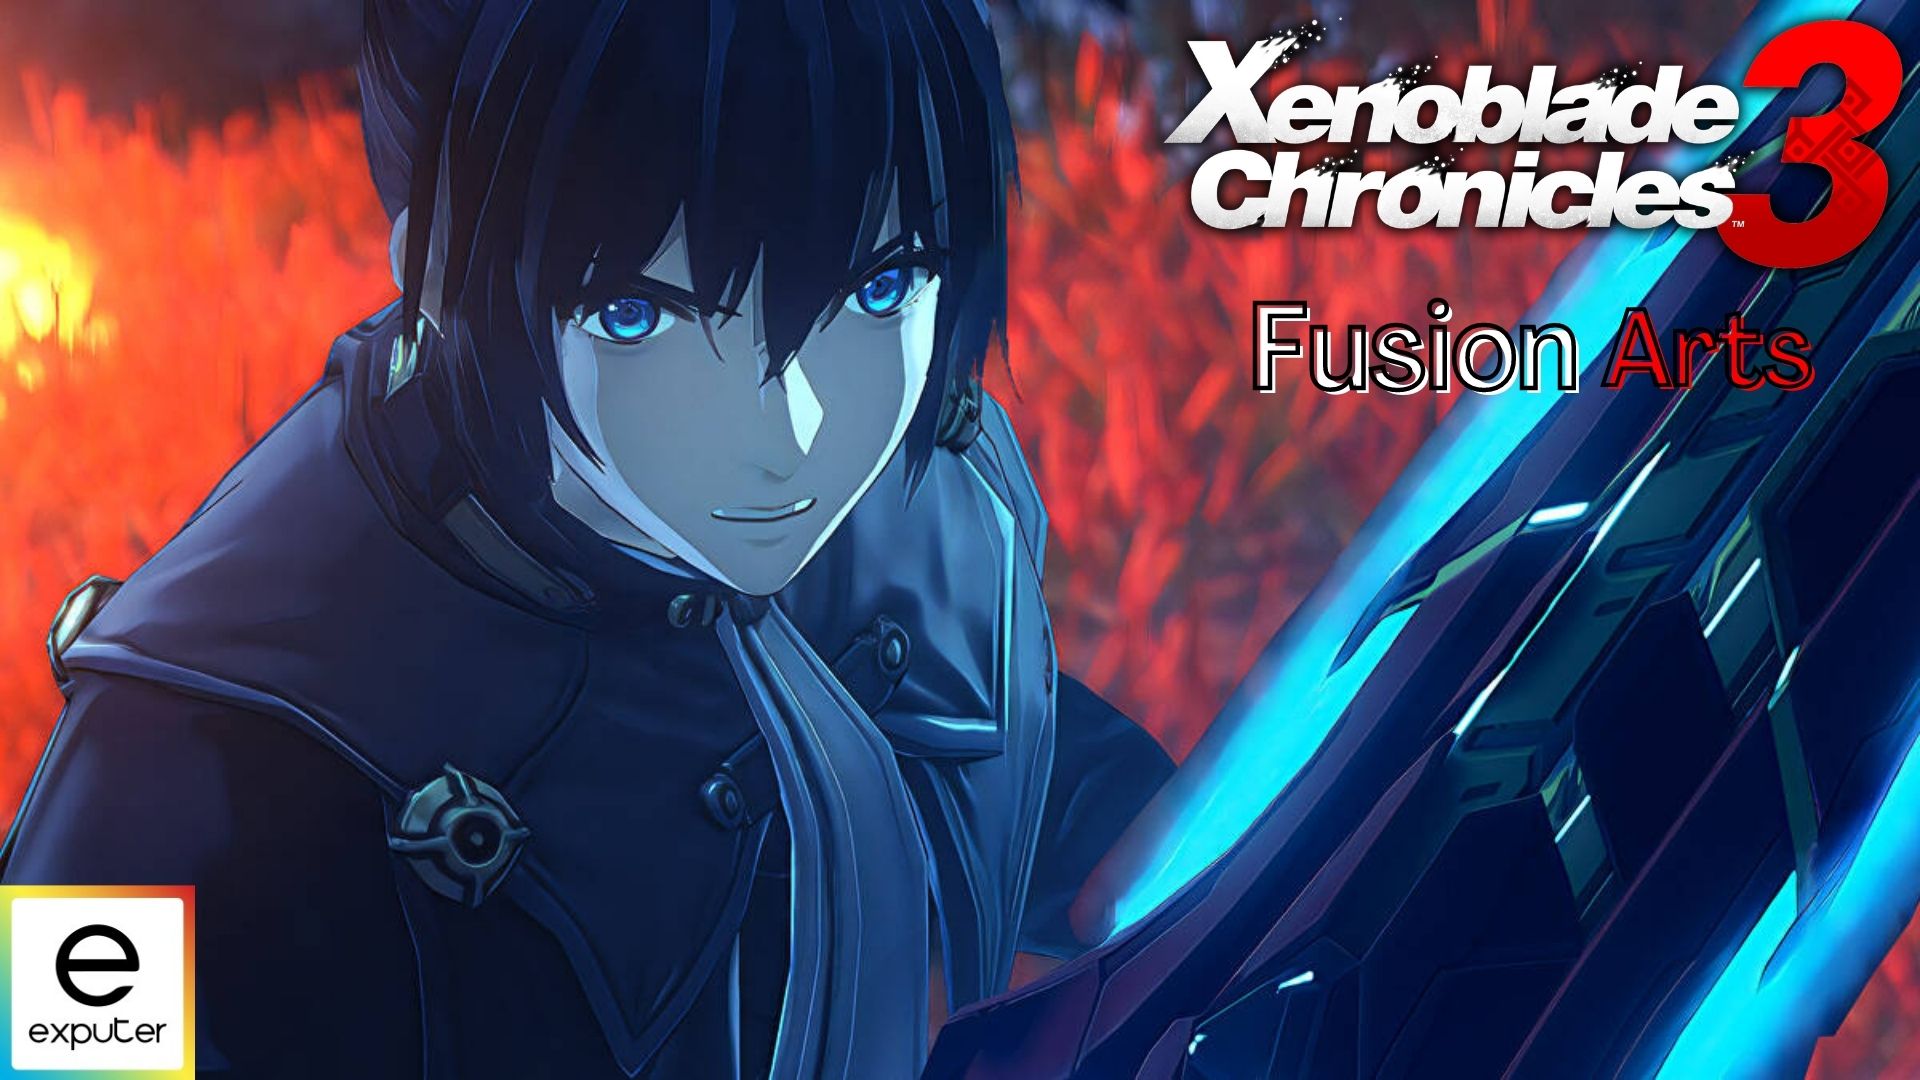 Fusion Arts in Xenoblade Chronicles 3